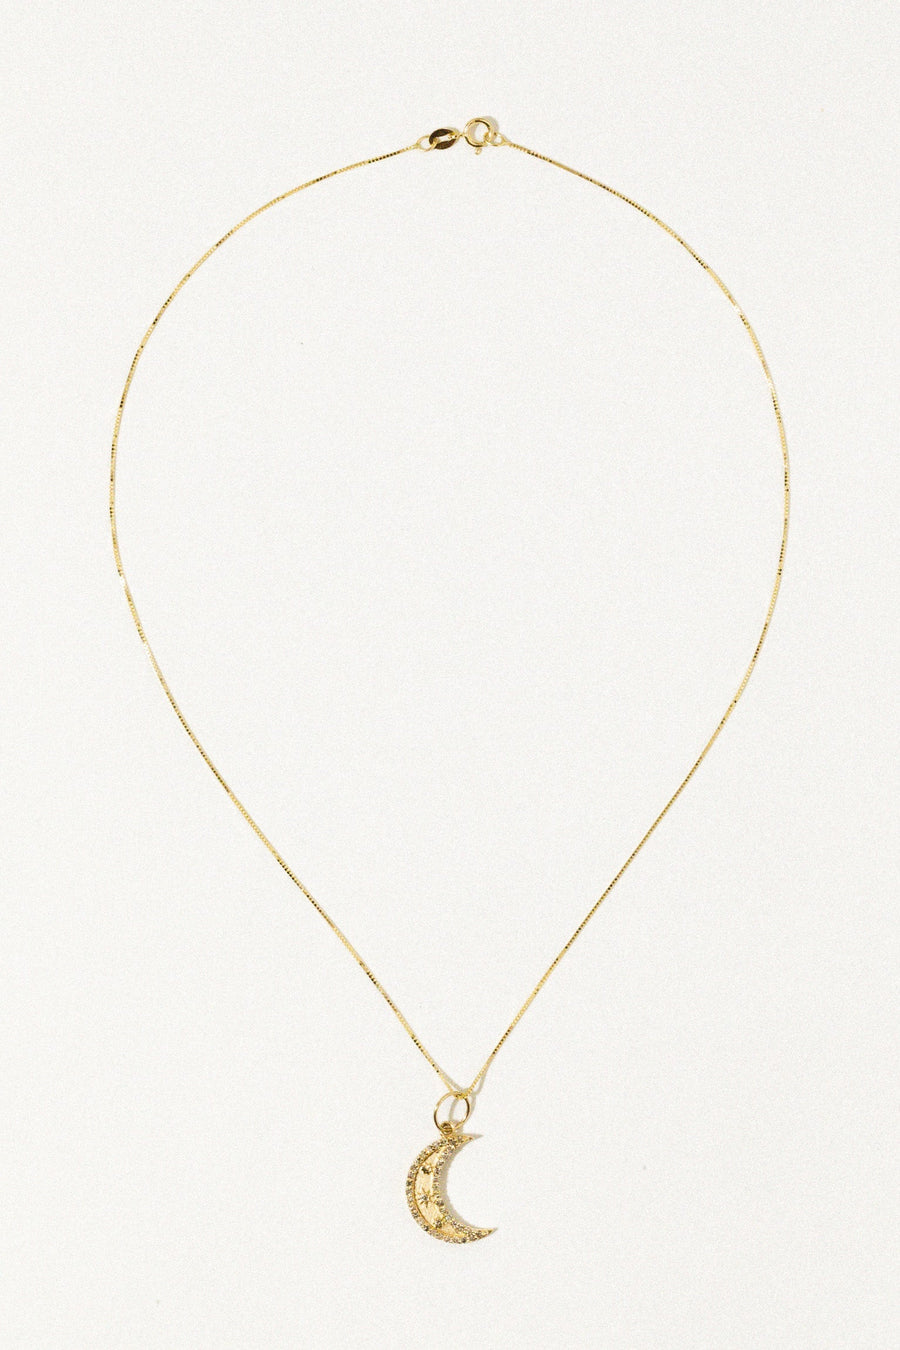 Stuller Jewelry Gold / 16 Inches 14kt New Moon Diamond Necklace